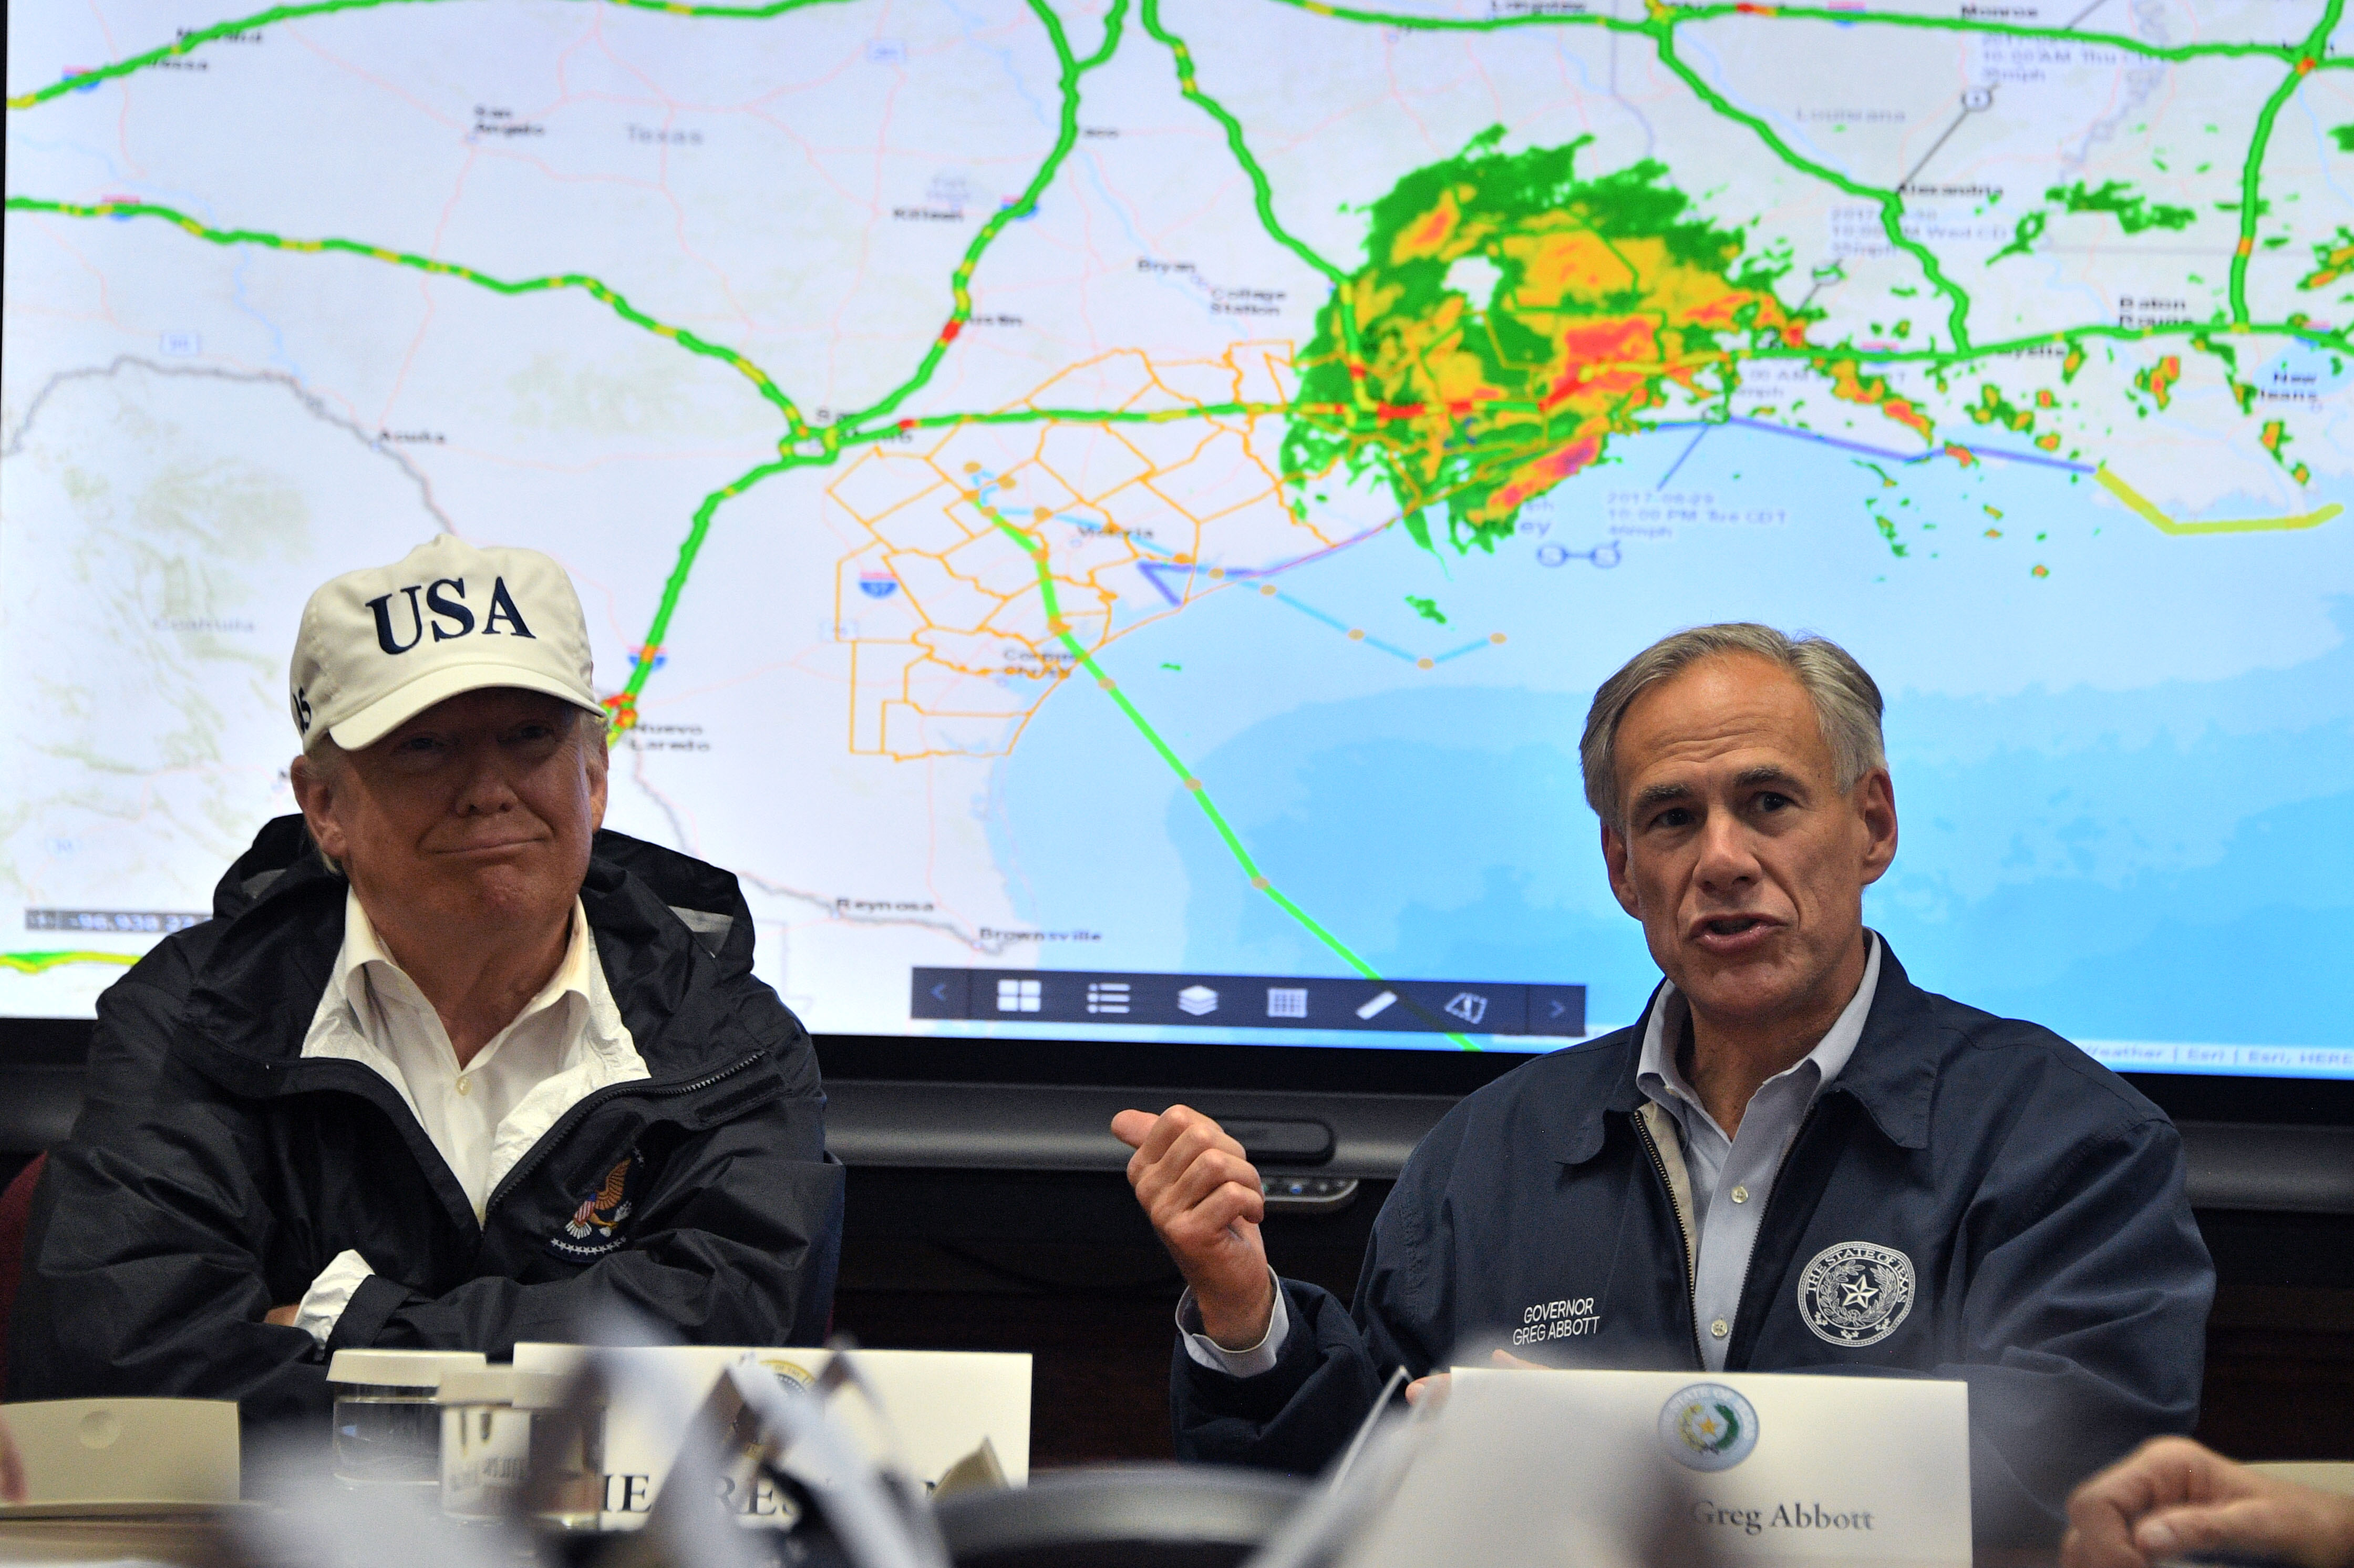 Texas Governor Greg Abbott speaks next to President Donald Trump in 2017, as rains from Hurricane Harvey continue to flood parts of Texas.